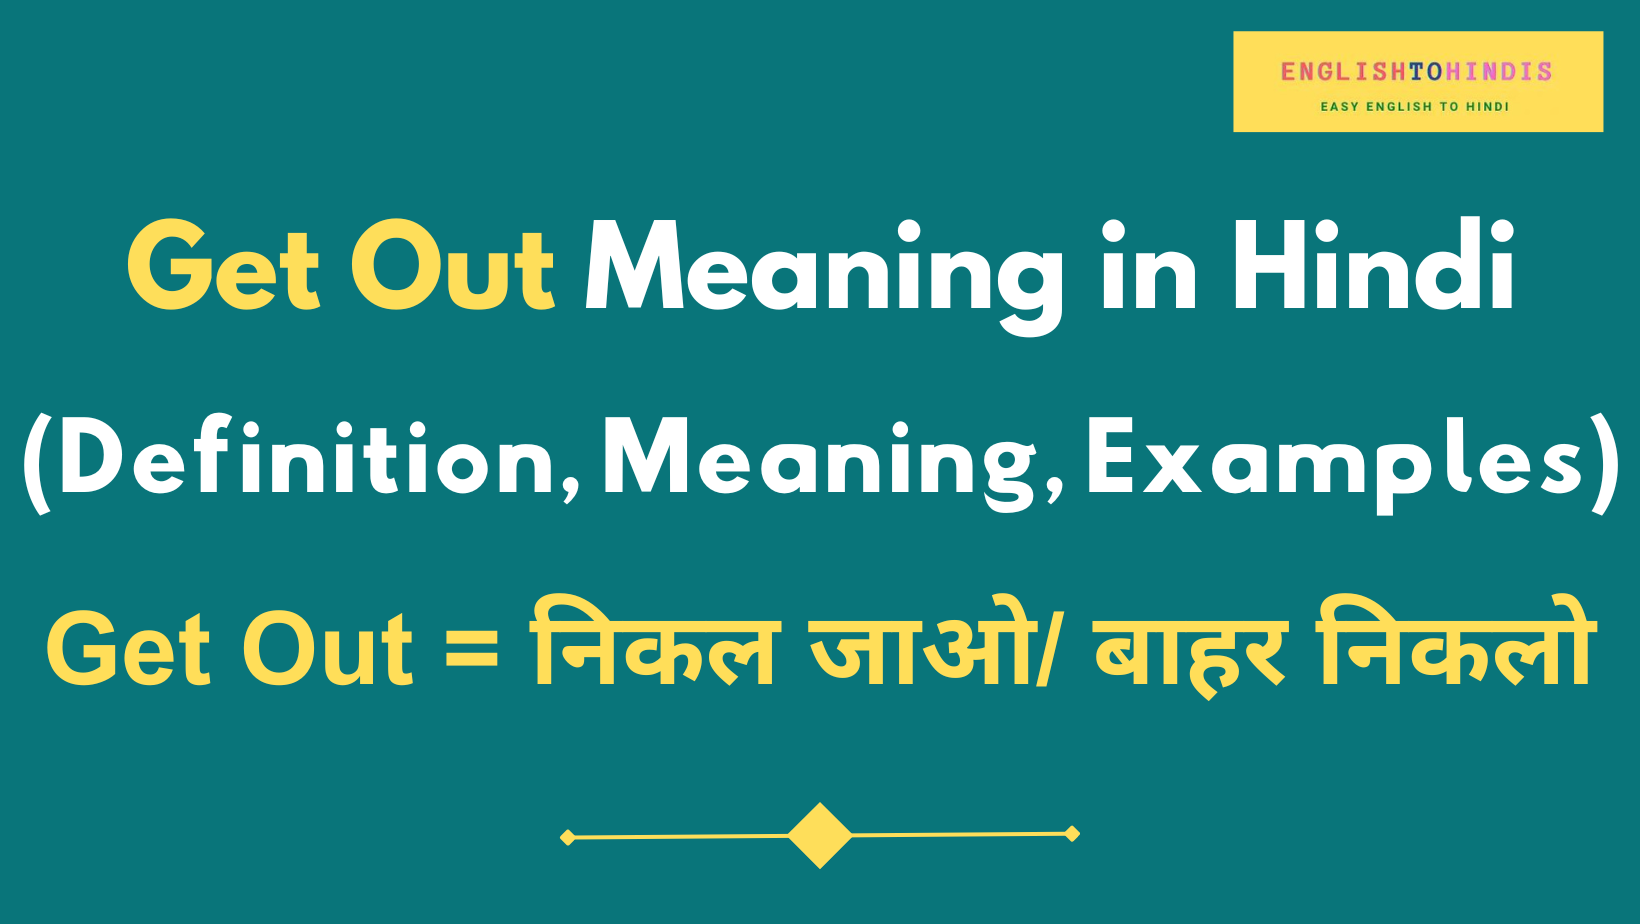 Get Out Meaning in Hindi